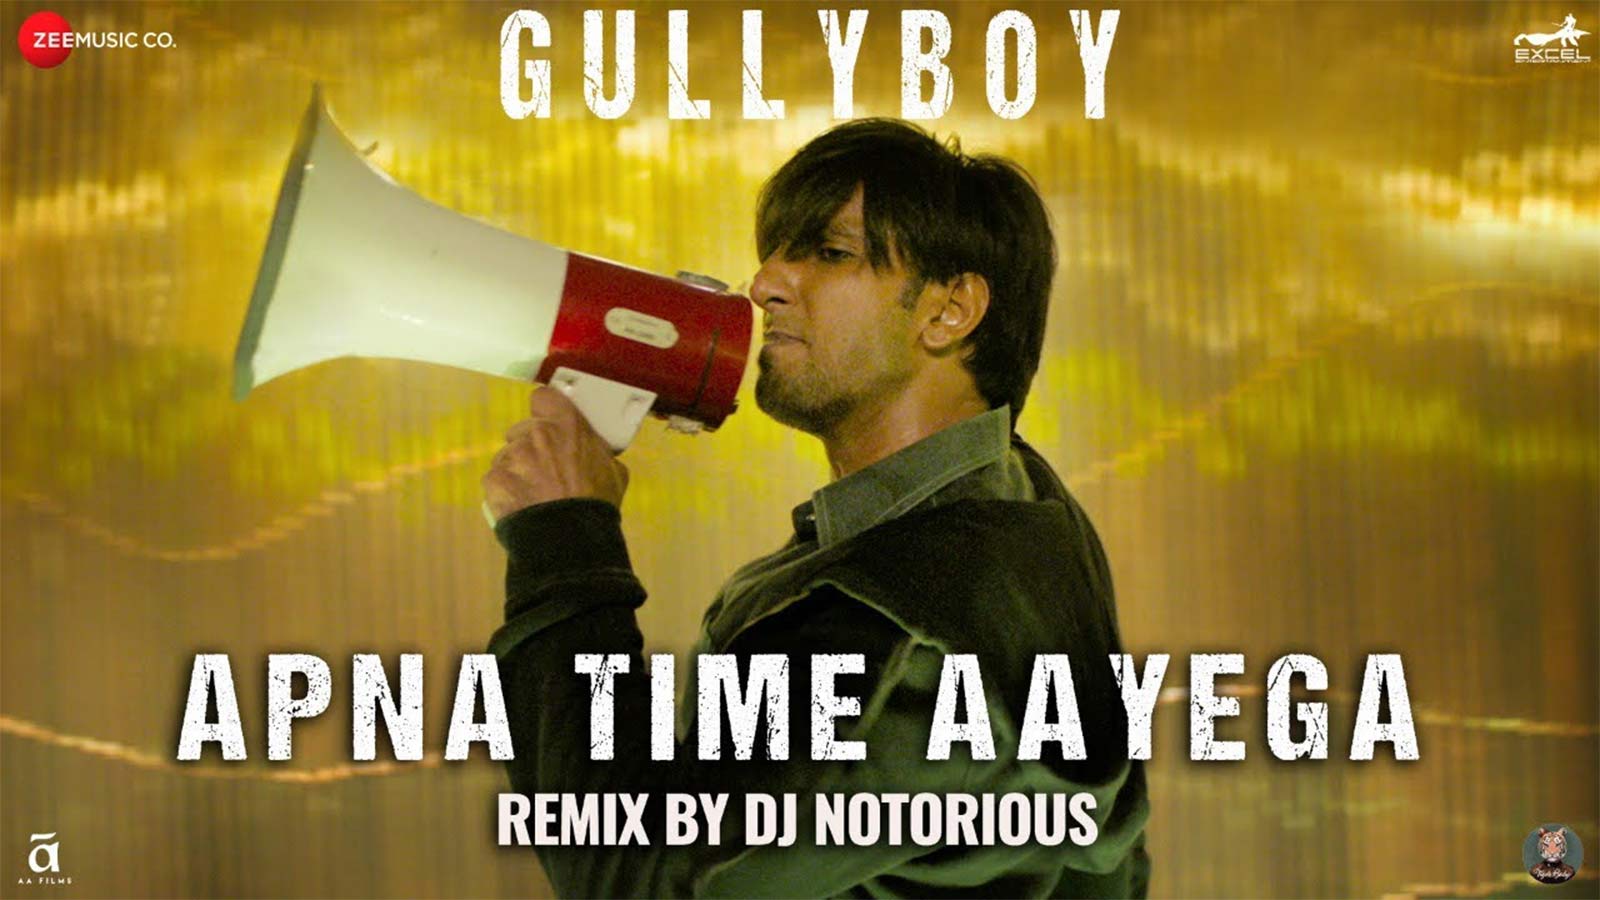 Gully Boy. Song Time Aayega (Remix By Dj Notorious). Hindi Video Songs of India